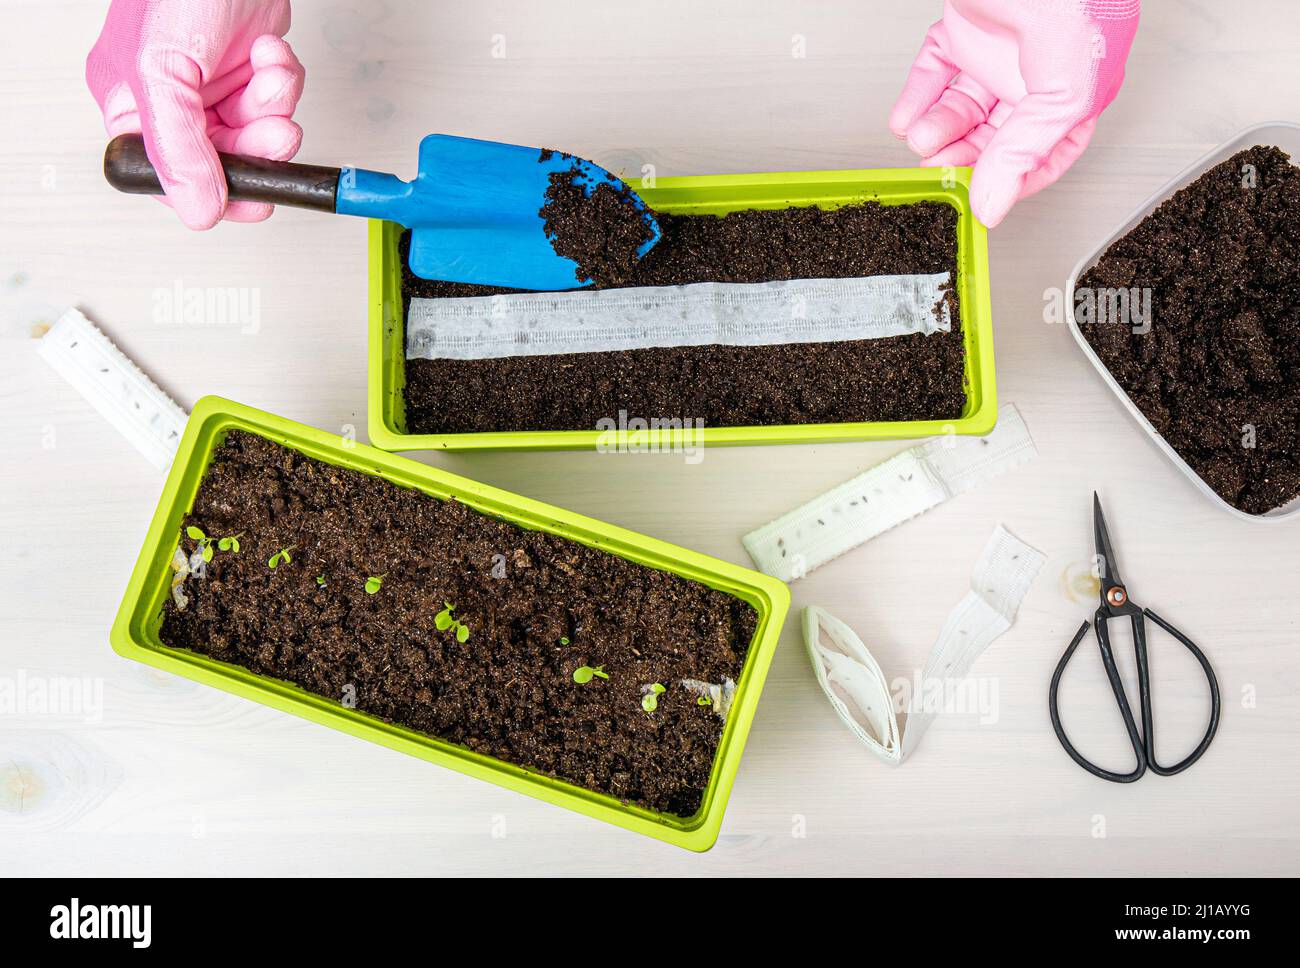 Person growing salad plants in home in spring from white paper seed tape, witch has plant seeds inside. Quick and easy way to sow tiny seeds. Stock Photo